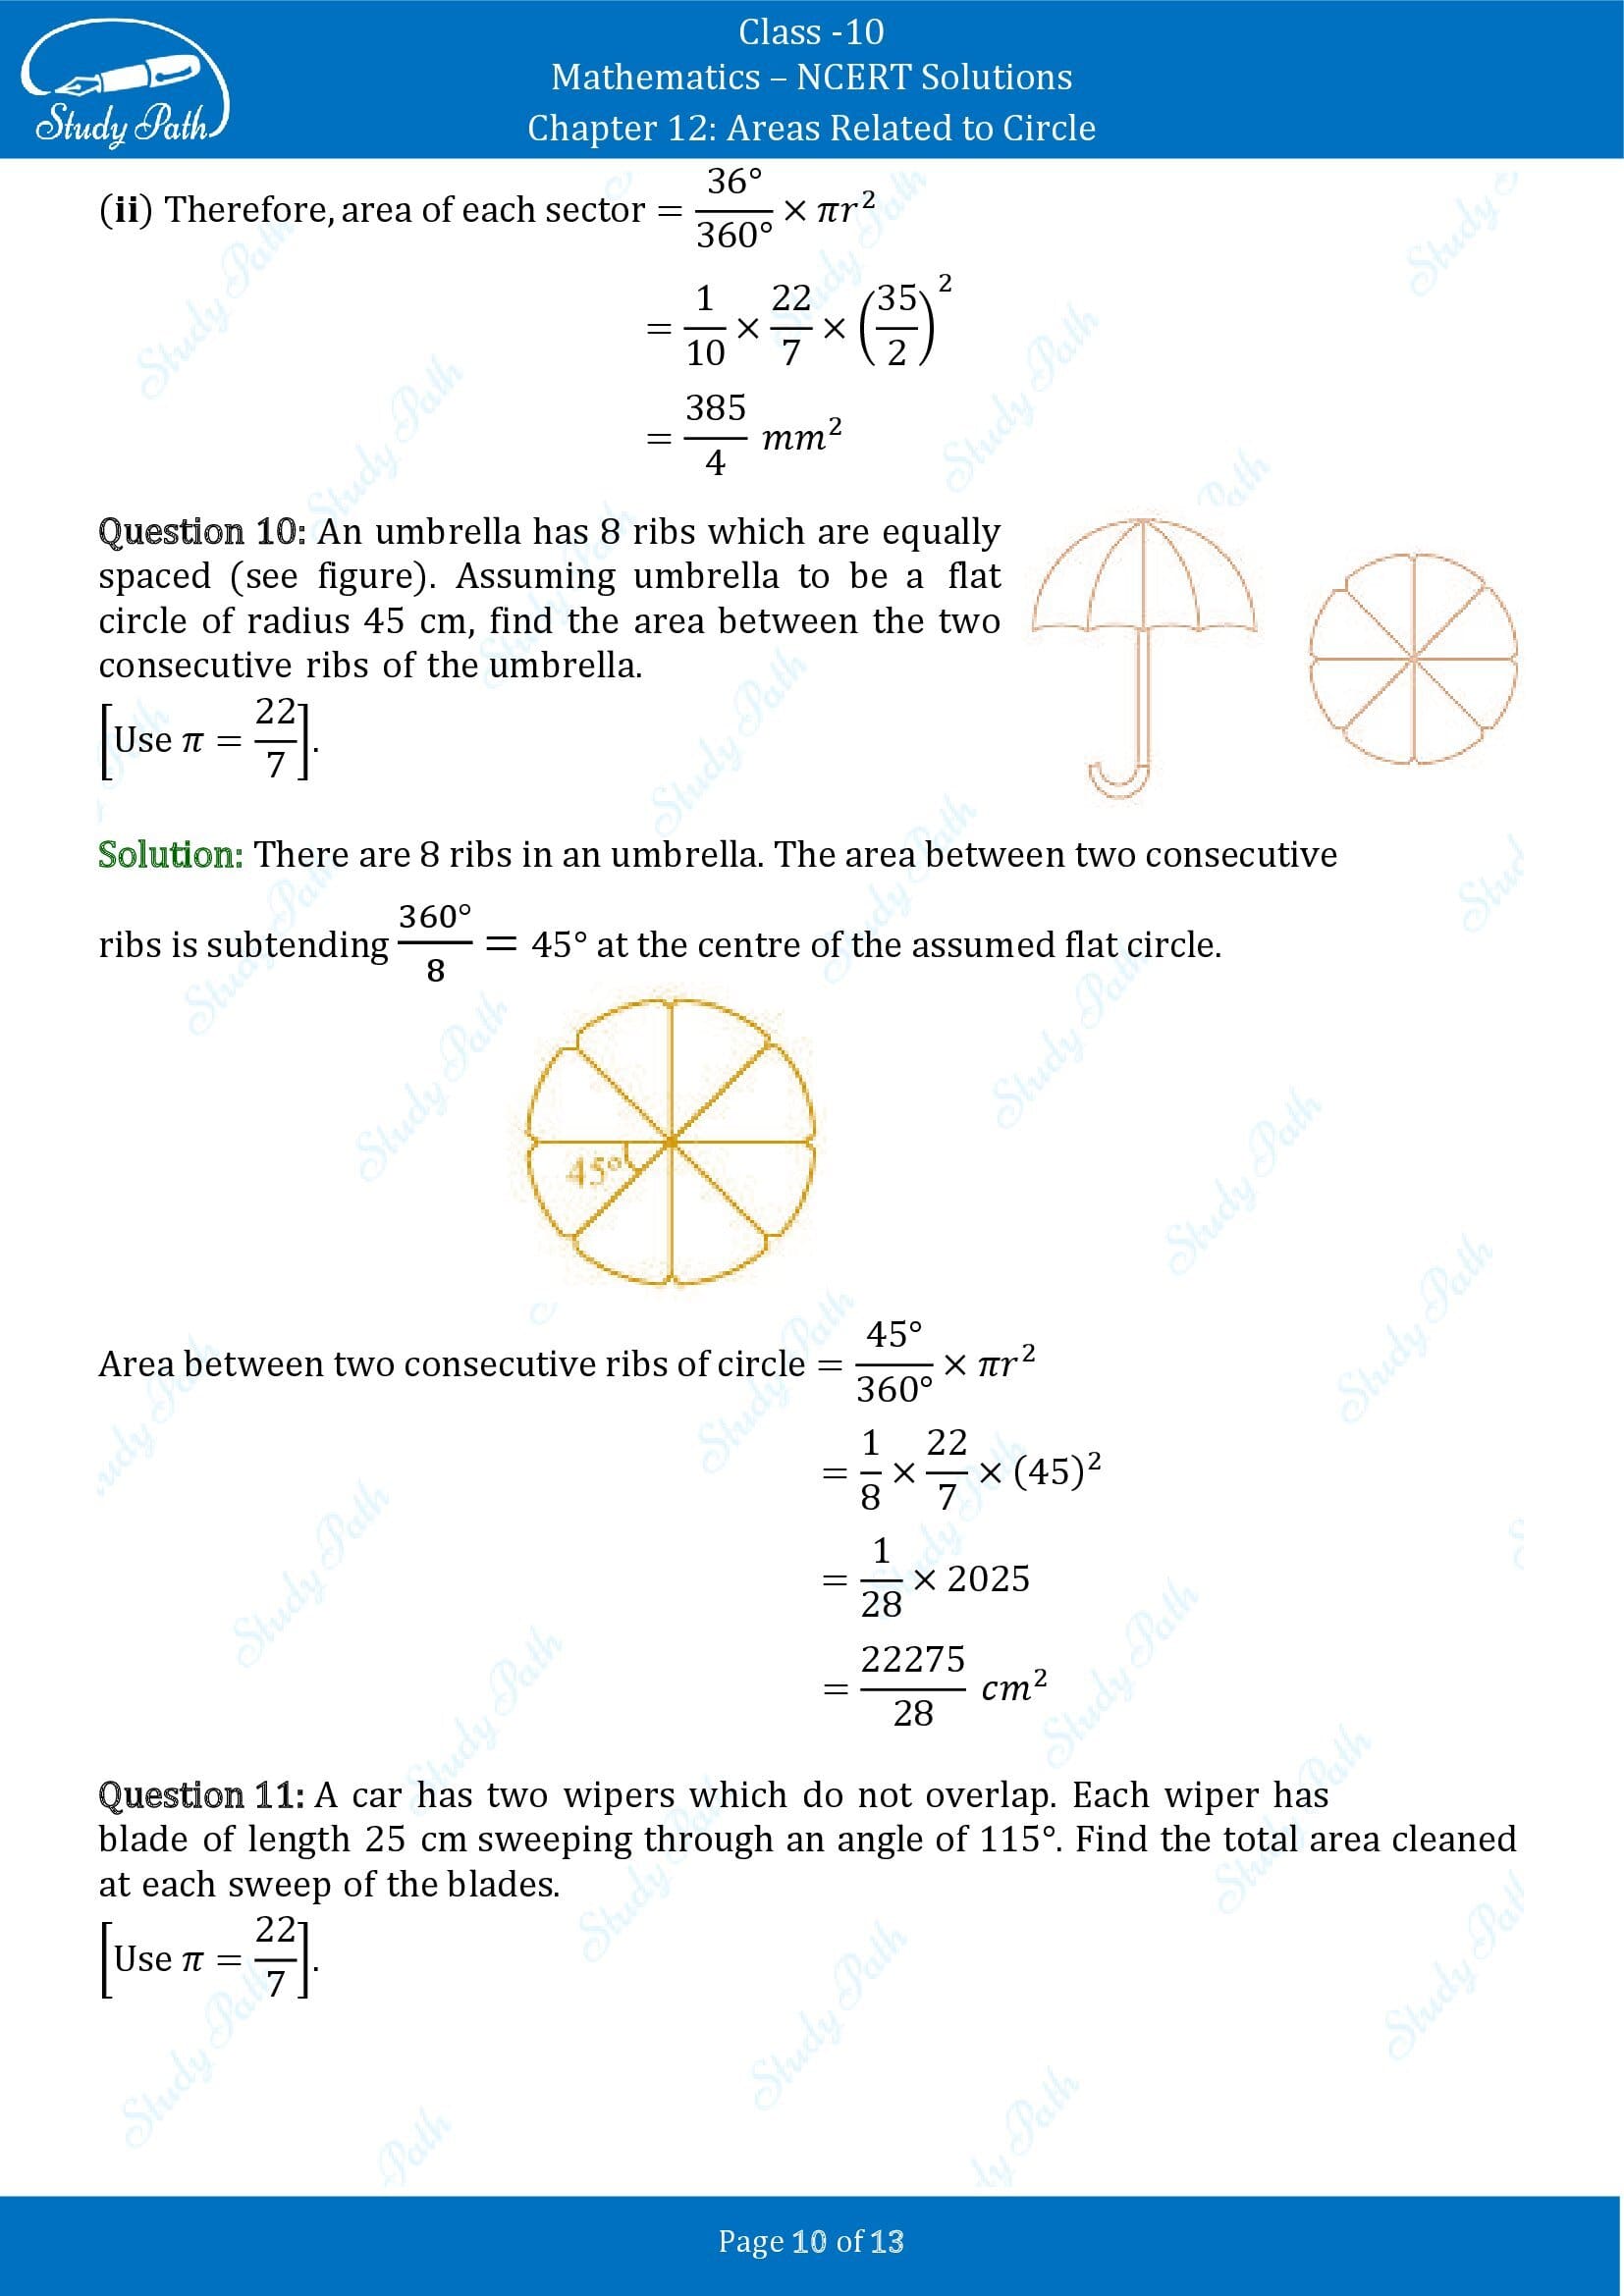 NCERT Solutions for Class 10 Maths Chapter 12 Areas Related to Circles Exercise 12.2 00010